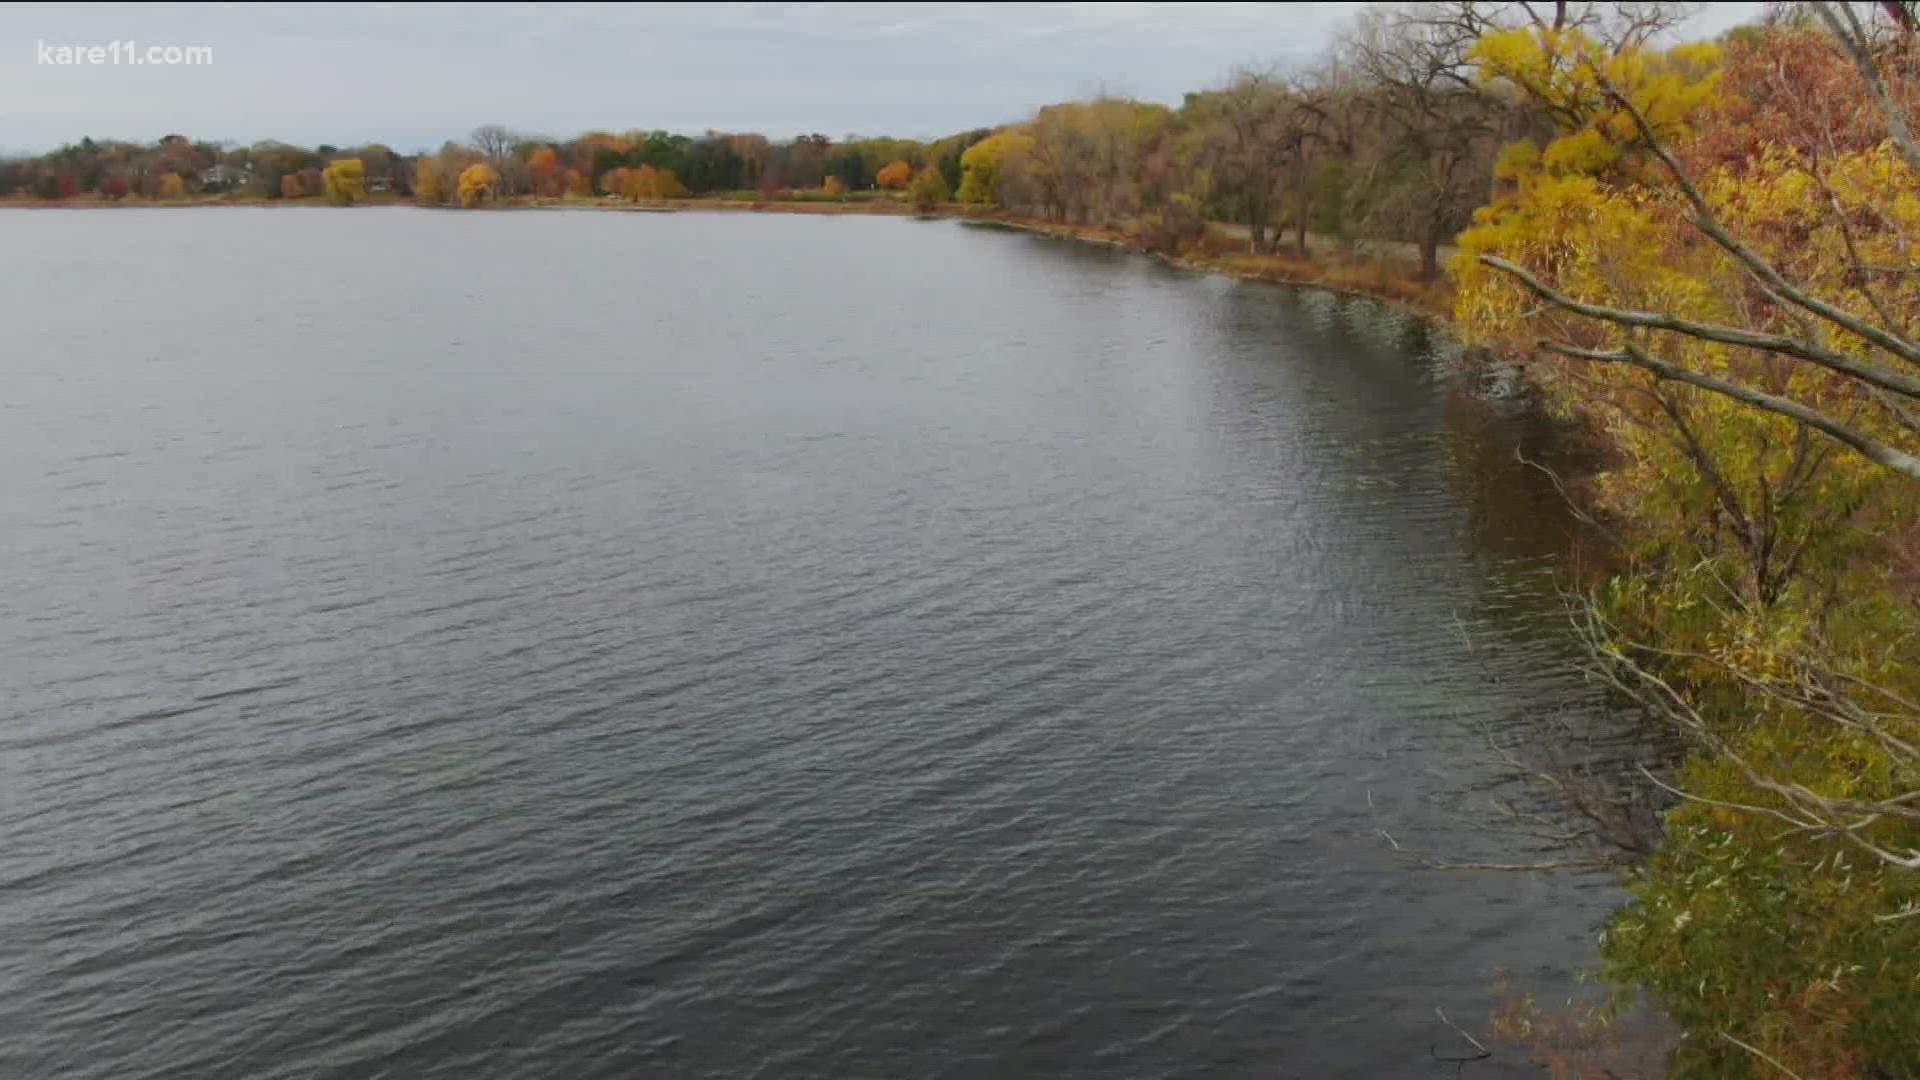 Large sections of the Minnesota River once again made the state's impaired water list, along with 3,000 other bodies of water in the state.